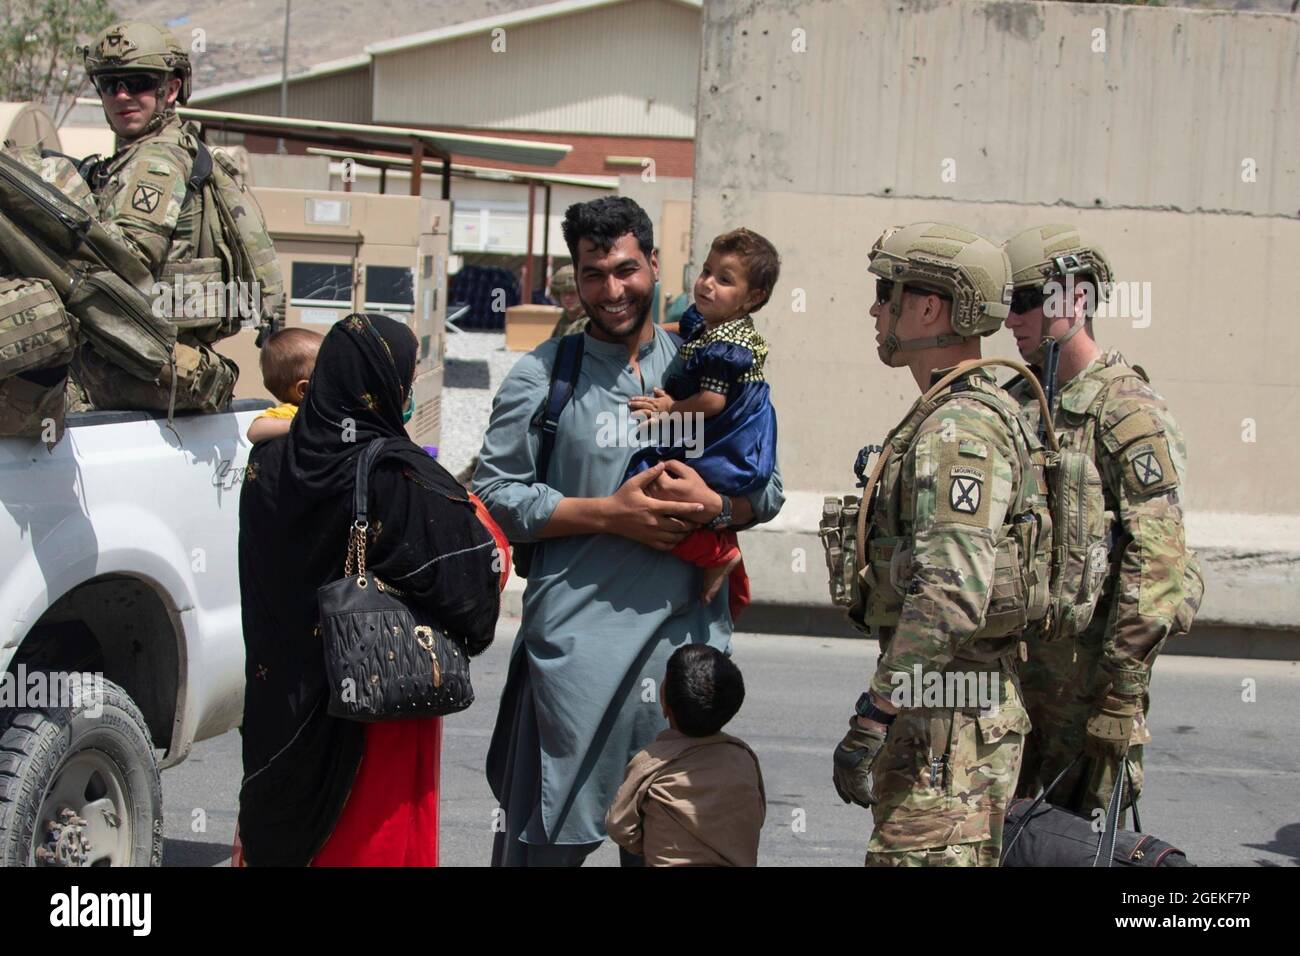 Kabul, Afghanistan. 20th Aug, 2021. U.S. soldiers with the 10th Mountain Division, escort civilians to safety during the evacuation of non-combatants at Hamid Karzai International Airport, part of Operation Allies Refuge August 20, 2021 in Kabul, Afghanistan. Credit: Planetpix/Alamy Live News Stock Photo